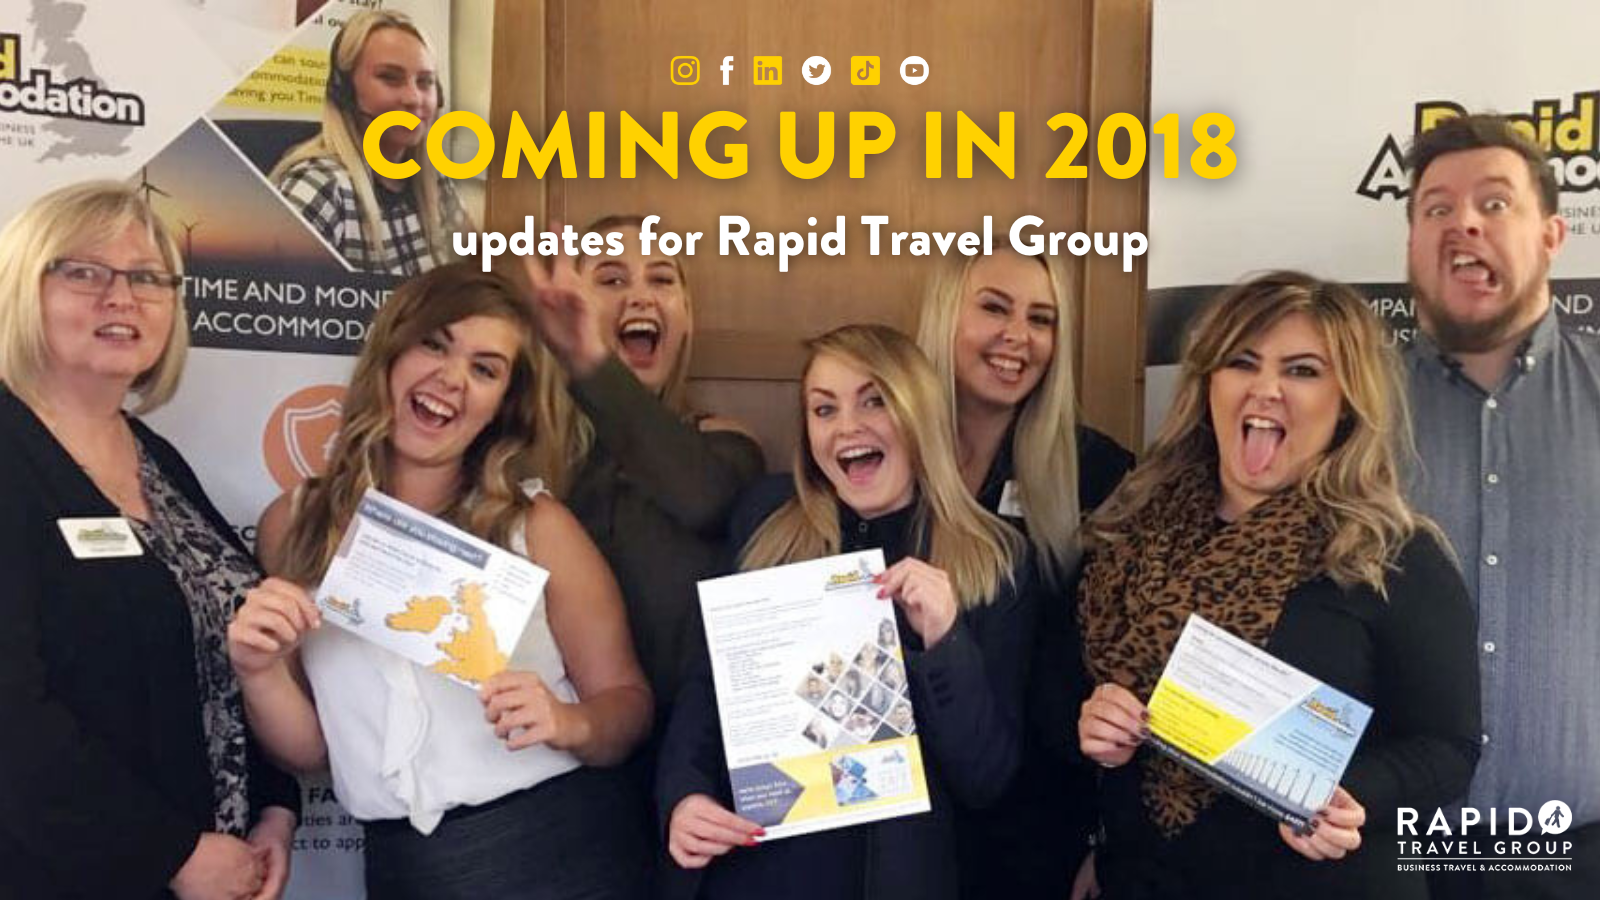 Coming Up in 2018: updates for Rapid Travel Group